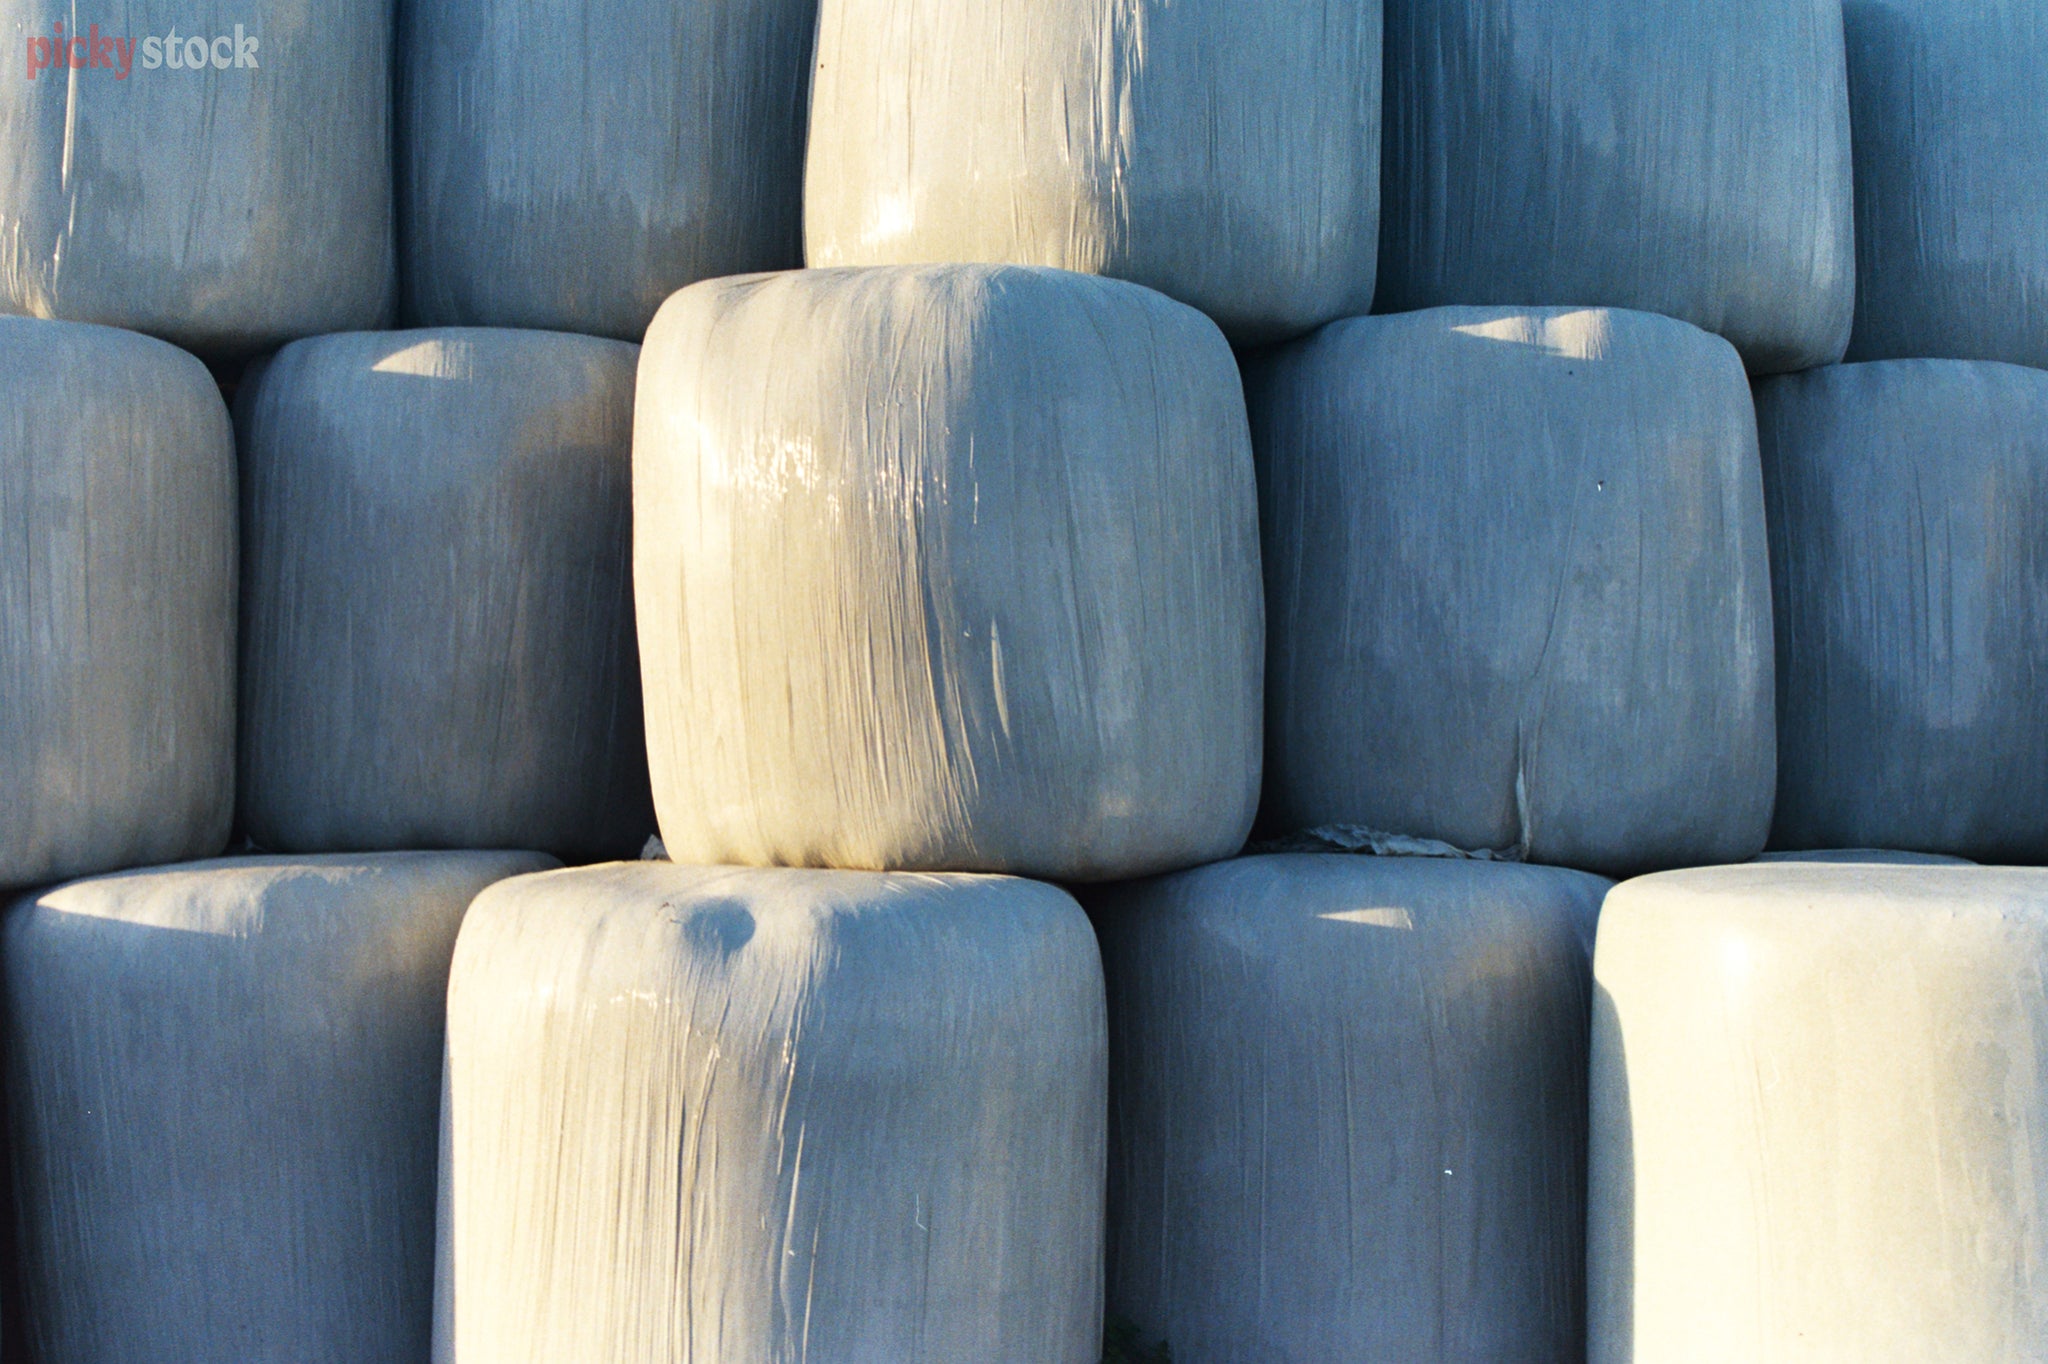 Grey hay bales stacked up after the harvest. The light hits the large bails.